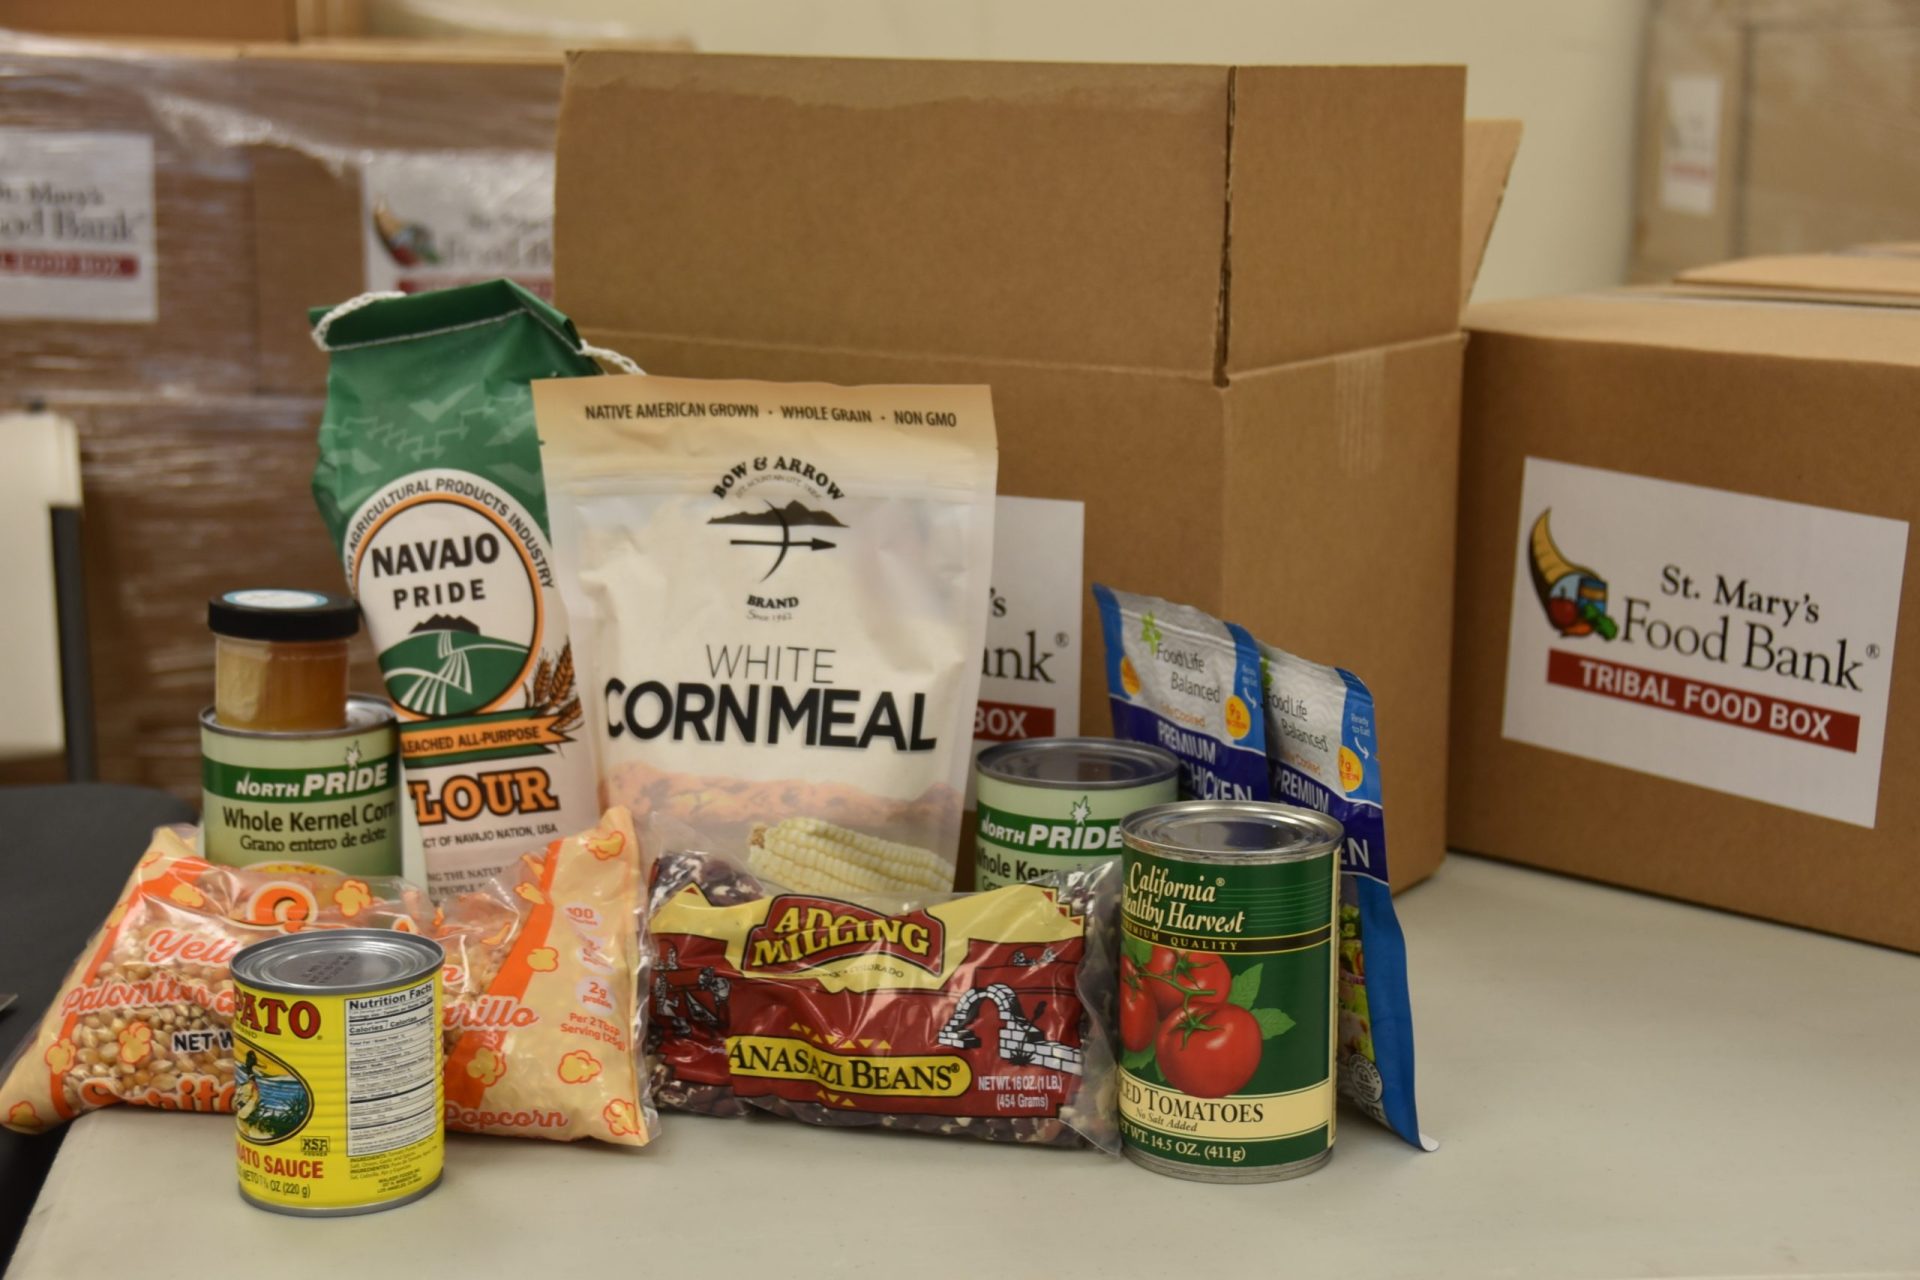 Tribal Food Boxes Given Out at Food Bank